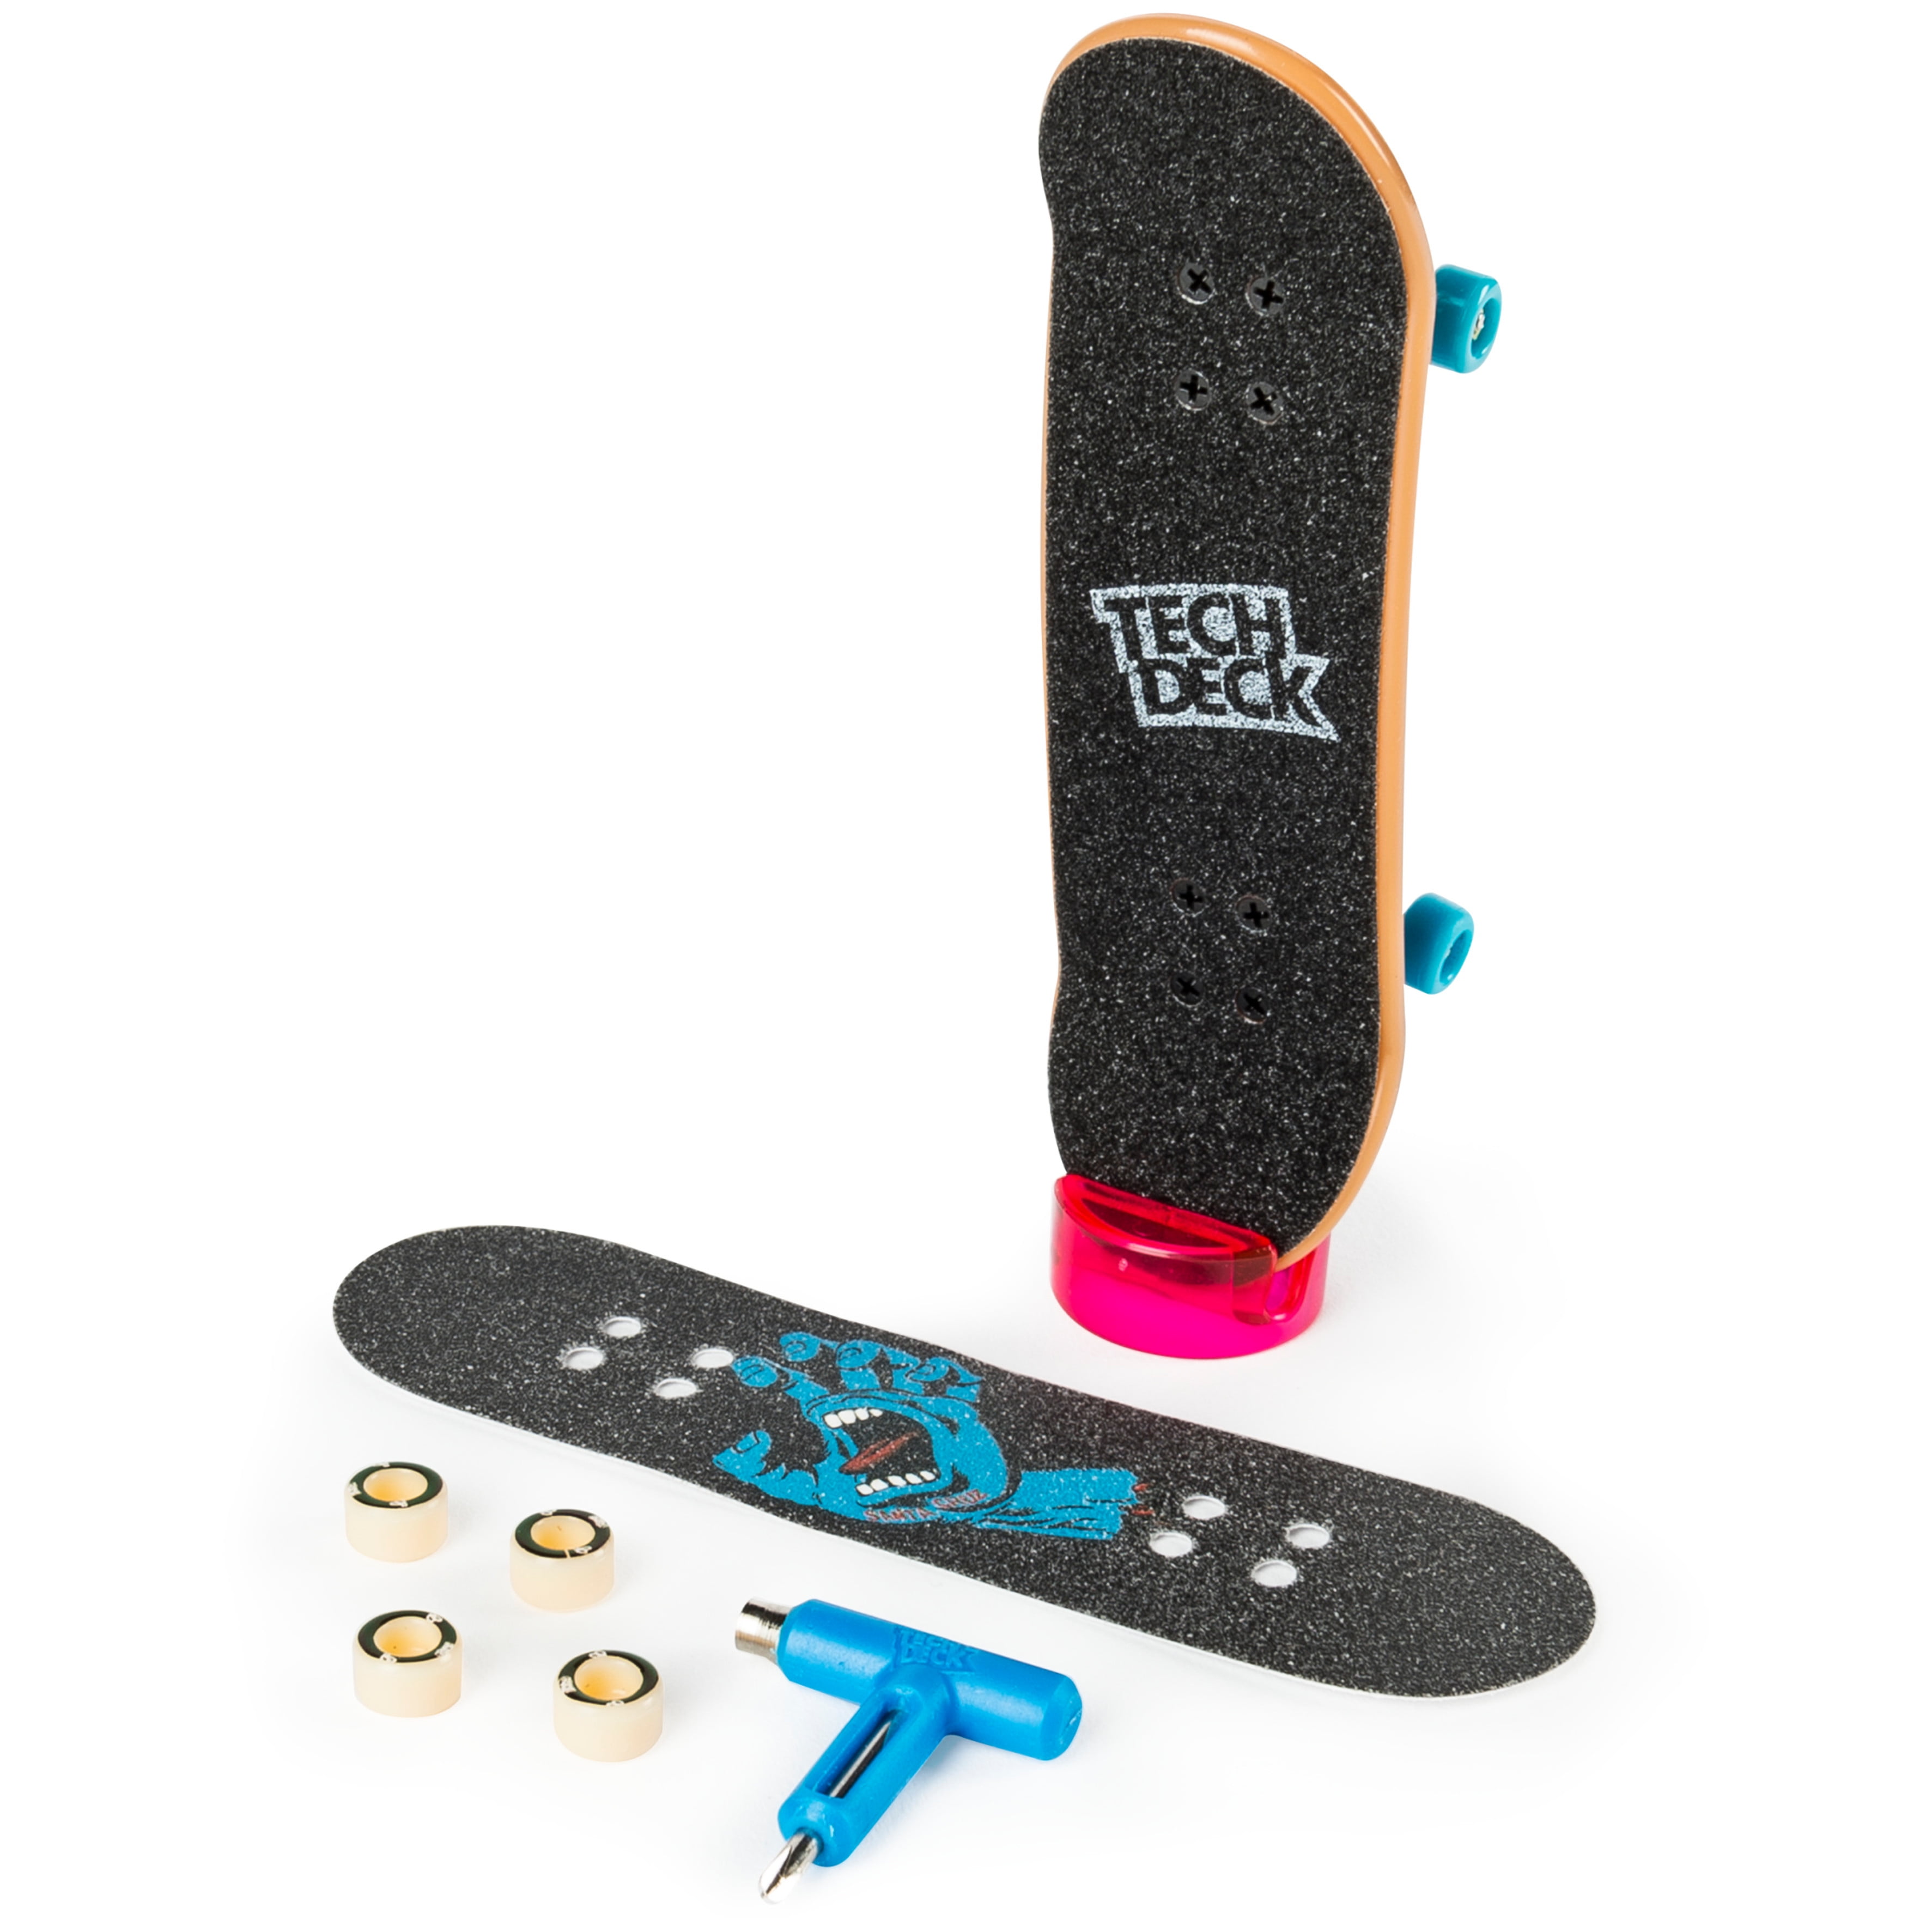 Tech Deck, 96mm Fingerboard Mini Skateboard with Authentic Designs